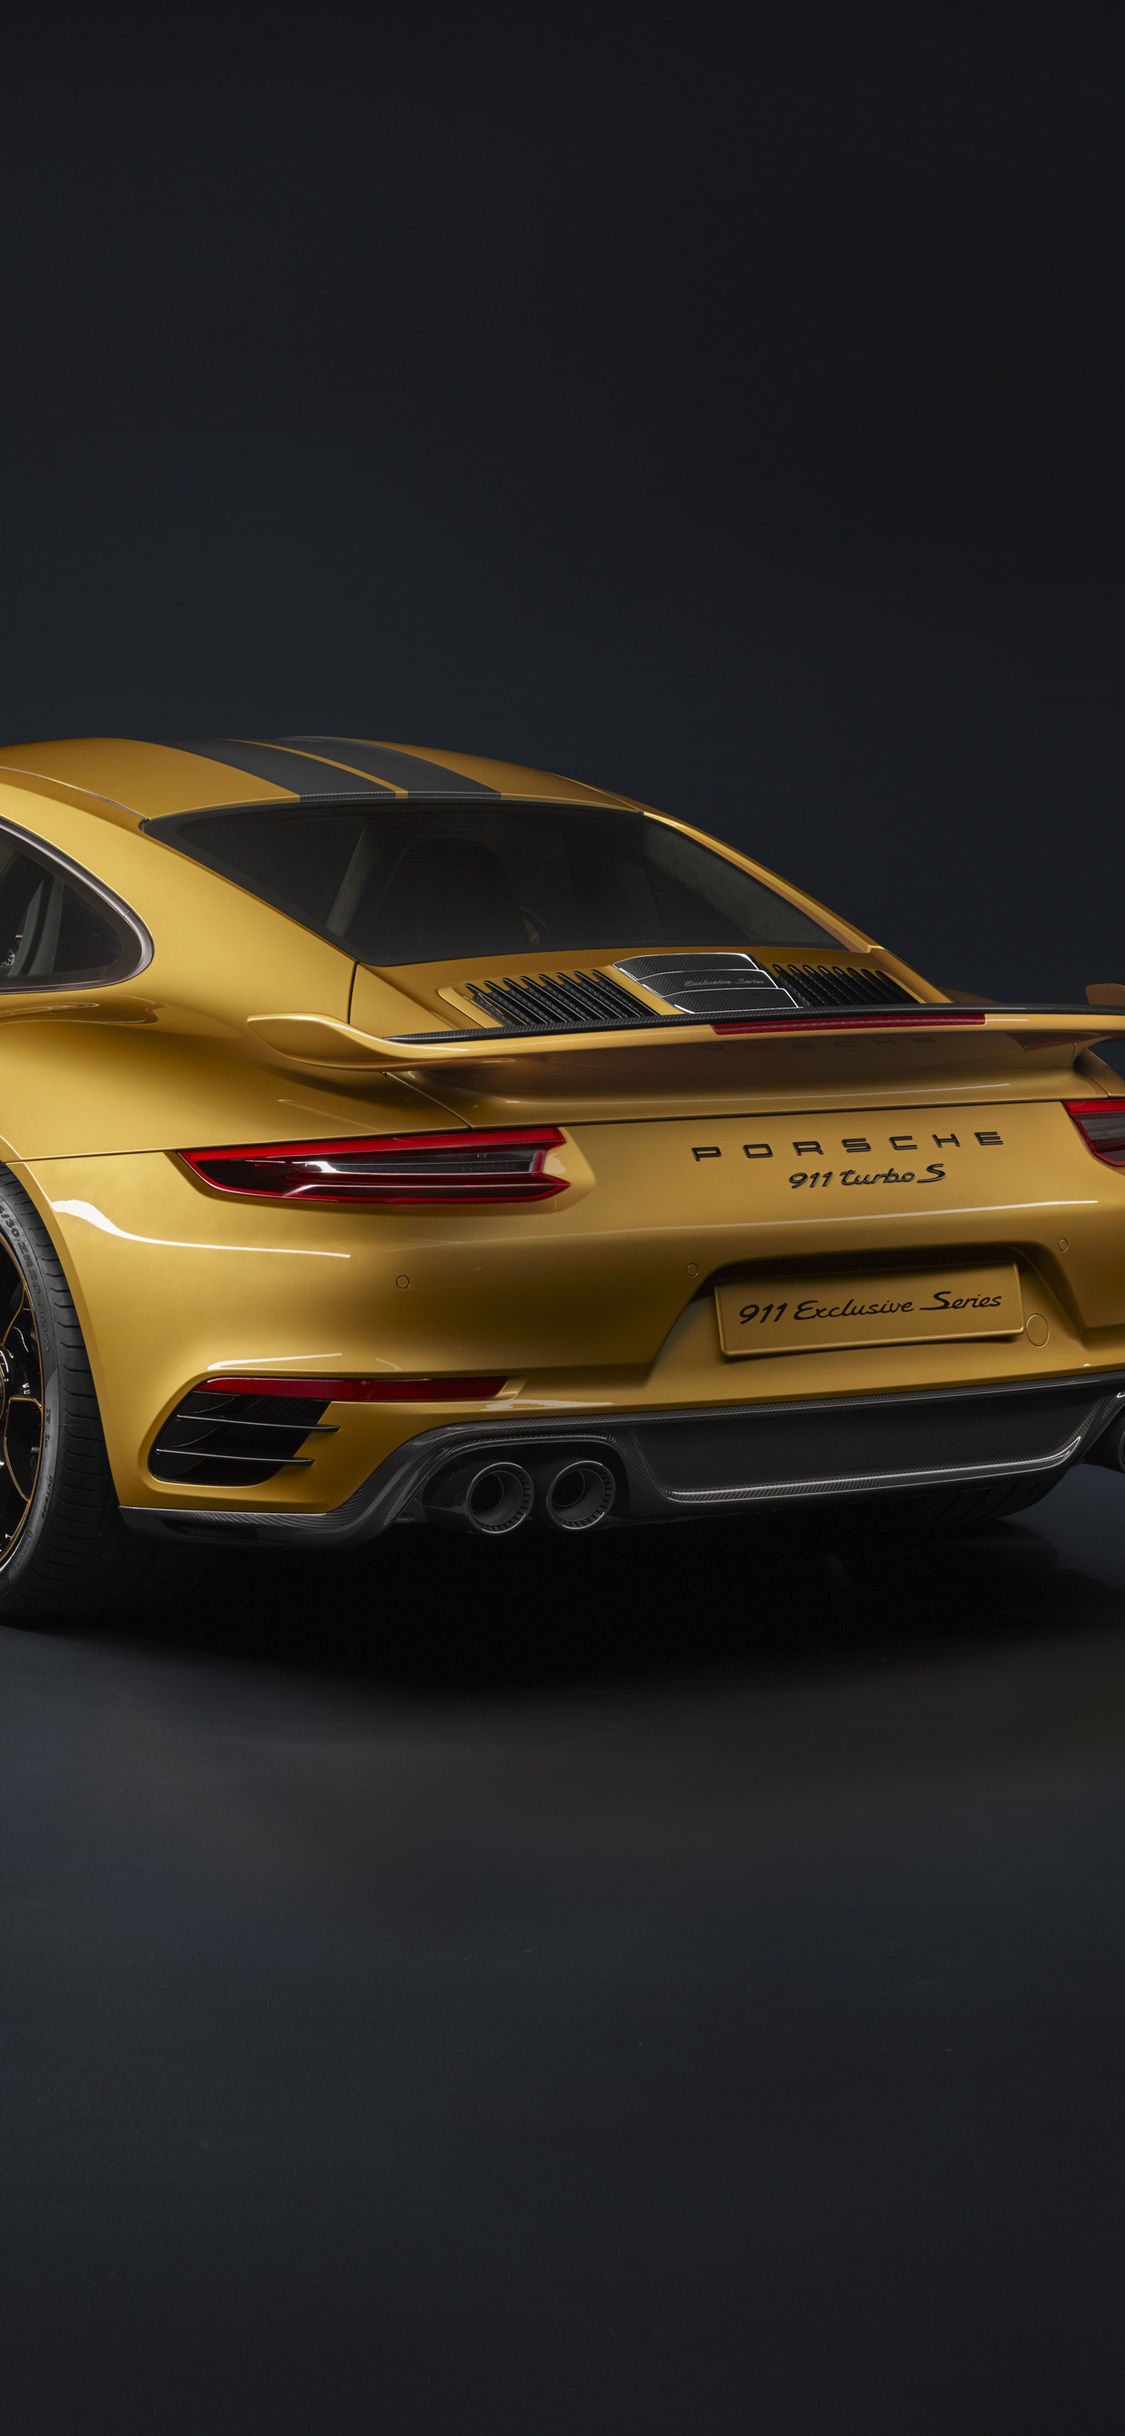 HD iPhone x porsche 911 wallpaper and image collection for Desktop & Mobile. Free wallpaper download